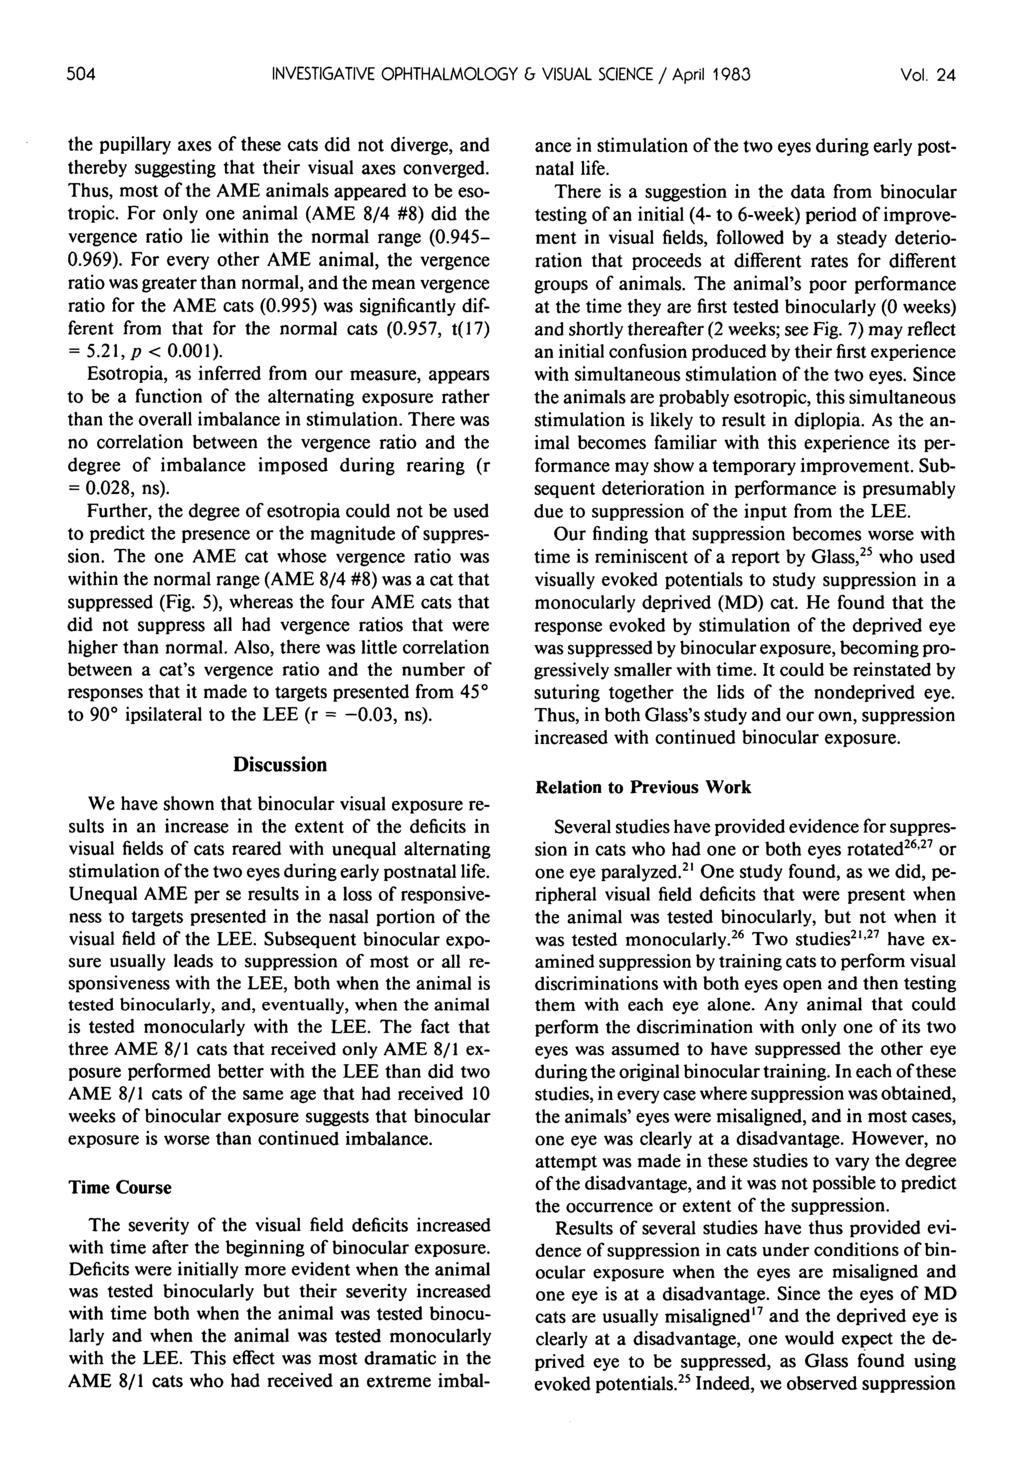 504 INVESTIGATIVE OPHTHALMOLOGY & VISUAL SCIENCE / April 1983 Vol. 24 the pupillary axes of these cats did not diverge, and thereby suggesting that their visual axes converged.